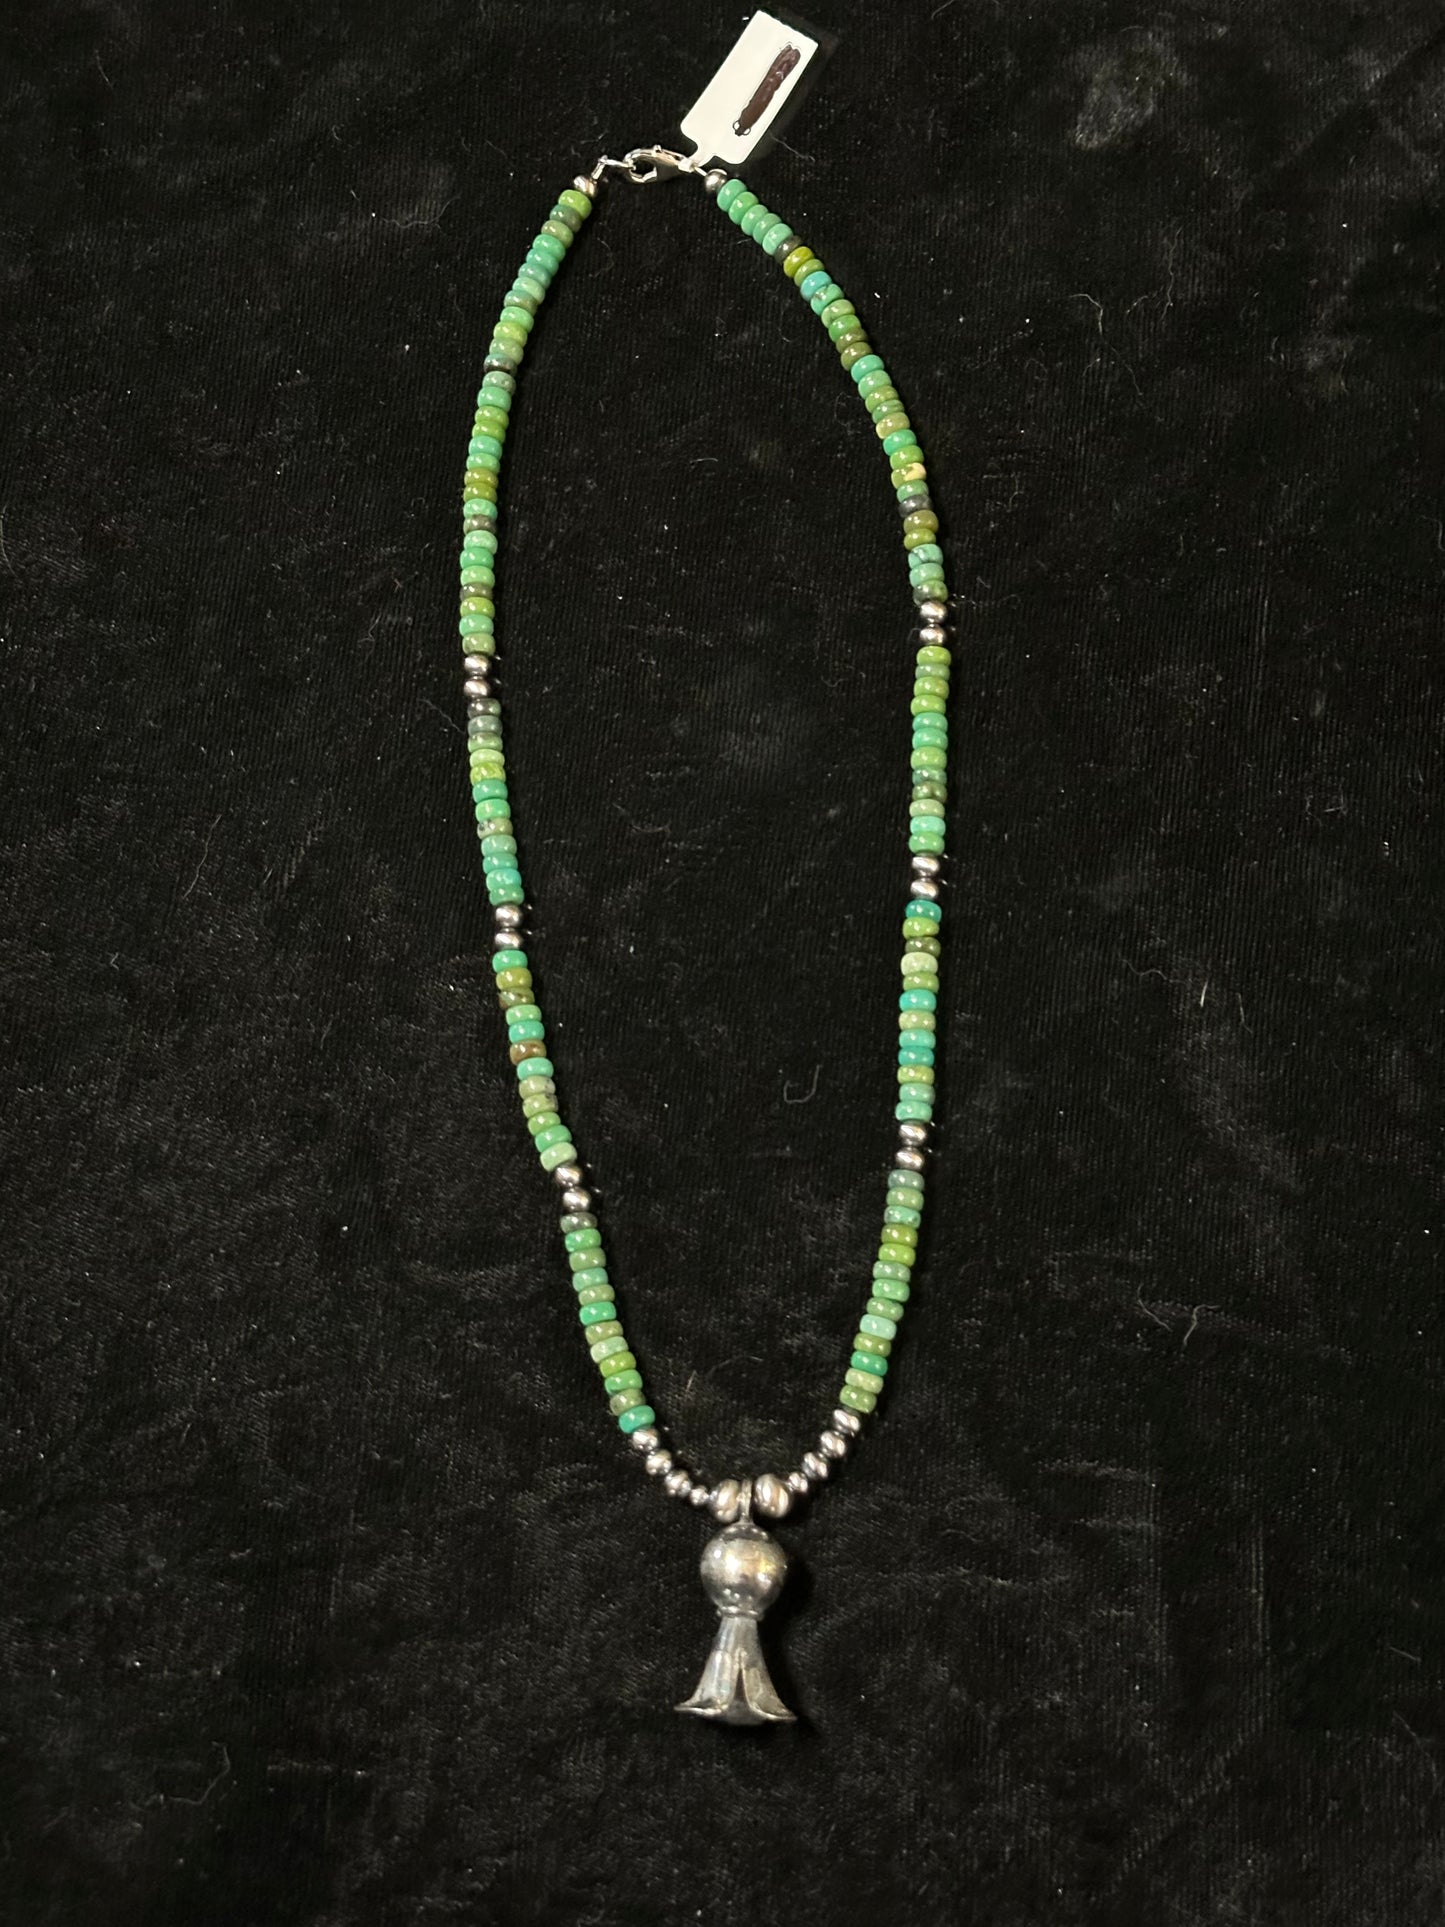 18" Nevada Green Turquoise Necklace and Navajo Pearls with a Sterling Silver Blossom